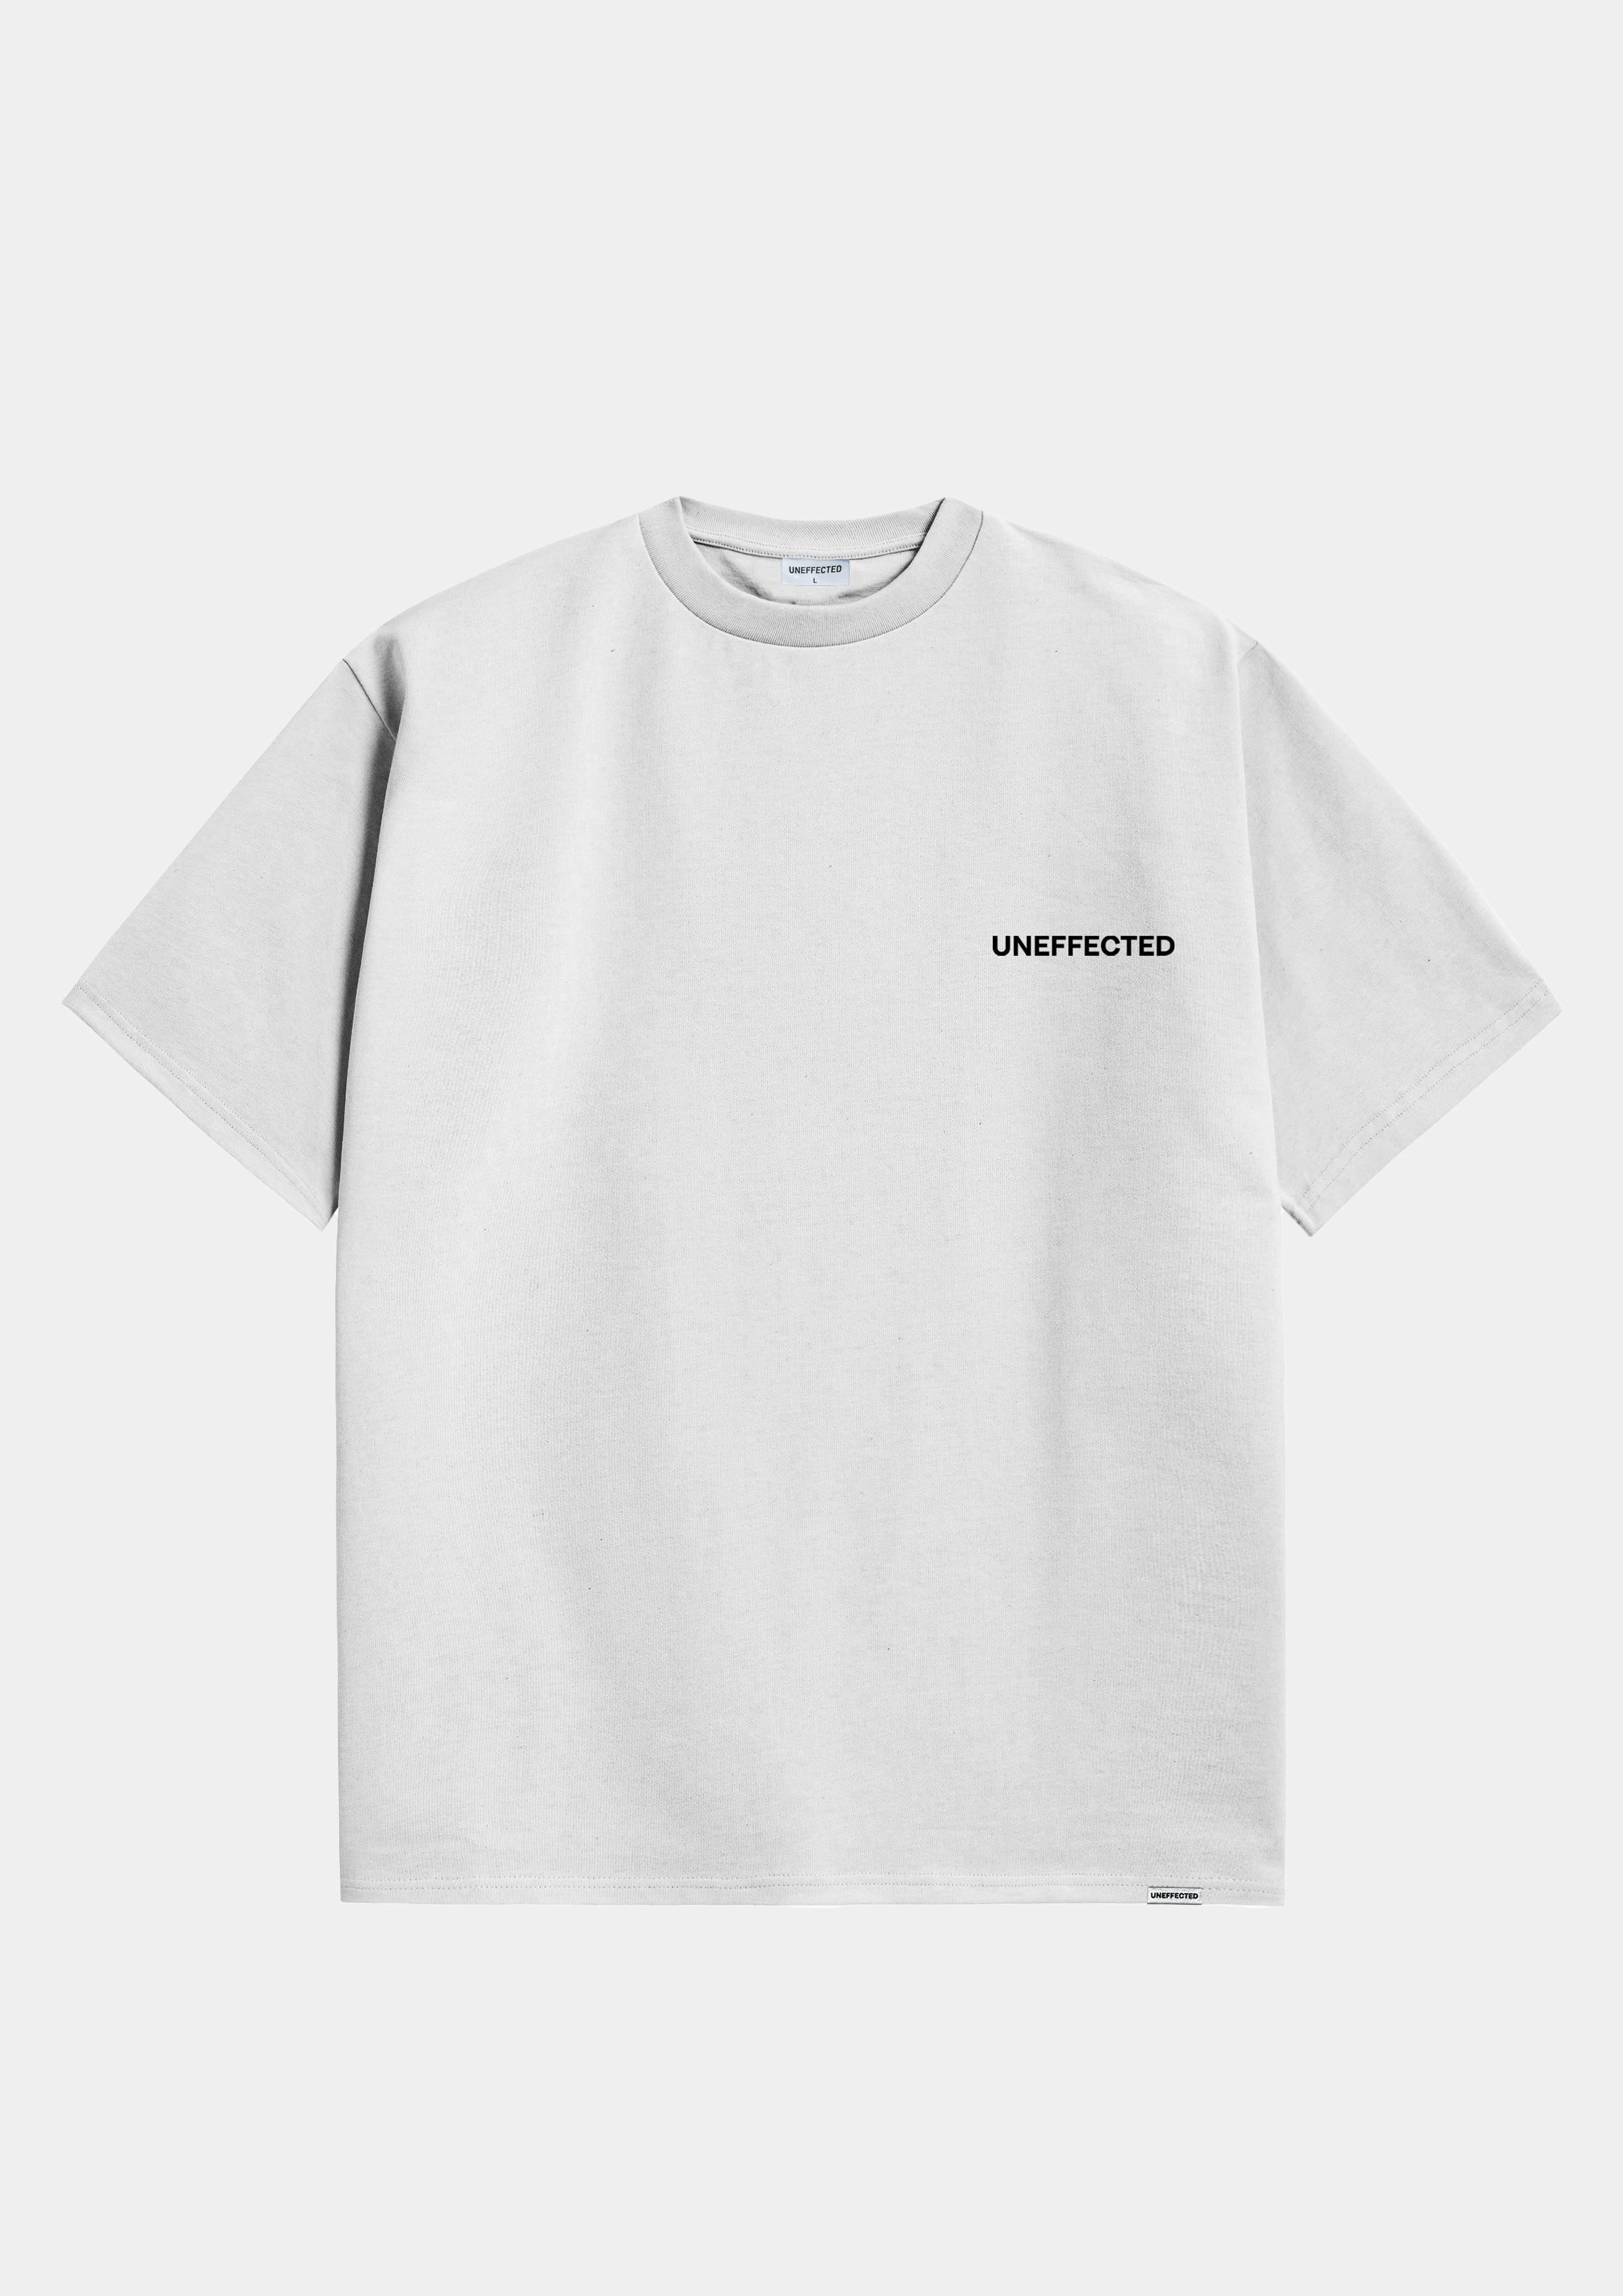 Weaponized 240GSM Oversized Tee - White - UNEFFECTED STUDIOS® - T - shirt - UNEFFECTED STUDIOS®